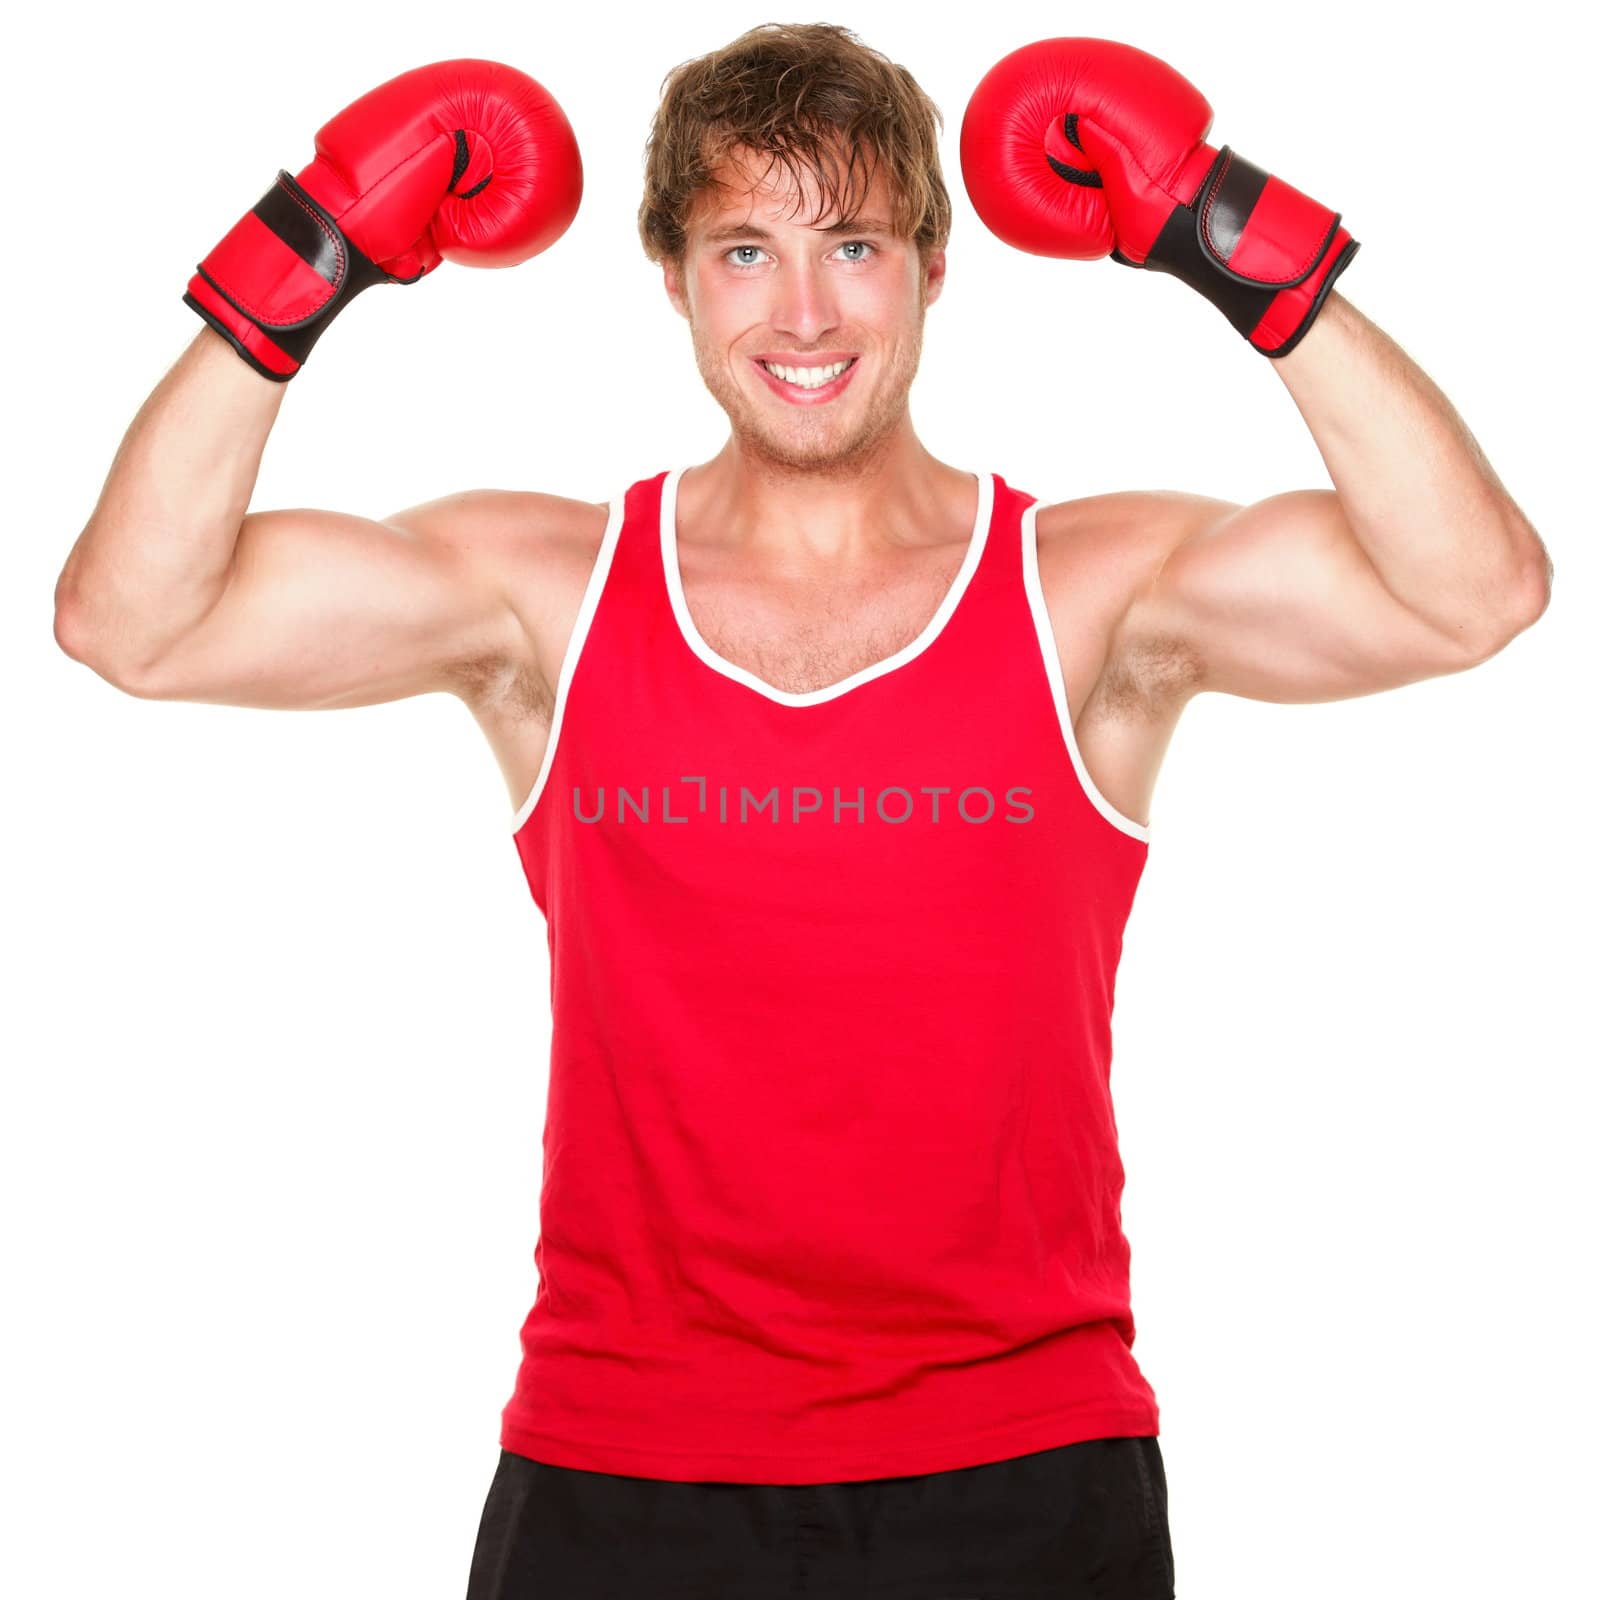 Fitness boxing man showing strength flexing muscles. Handsome strong fit boxer smiling happy wearing red boxing gloves isolated on white background.